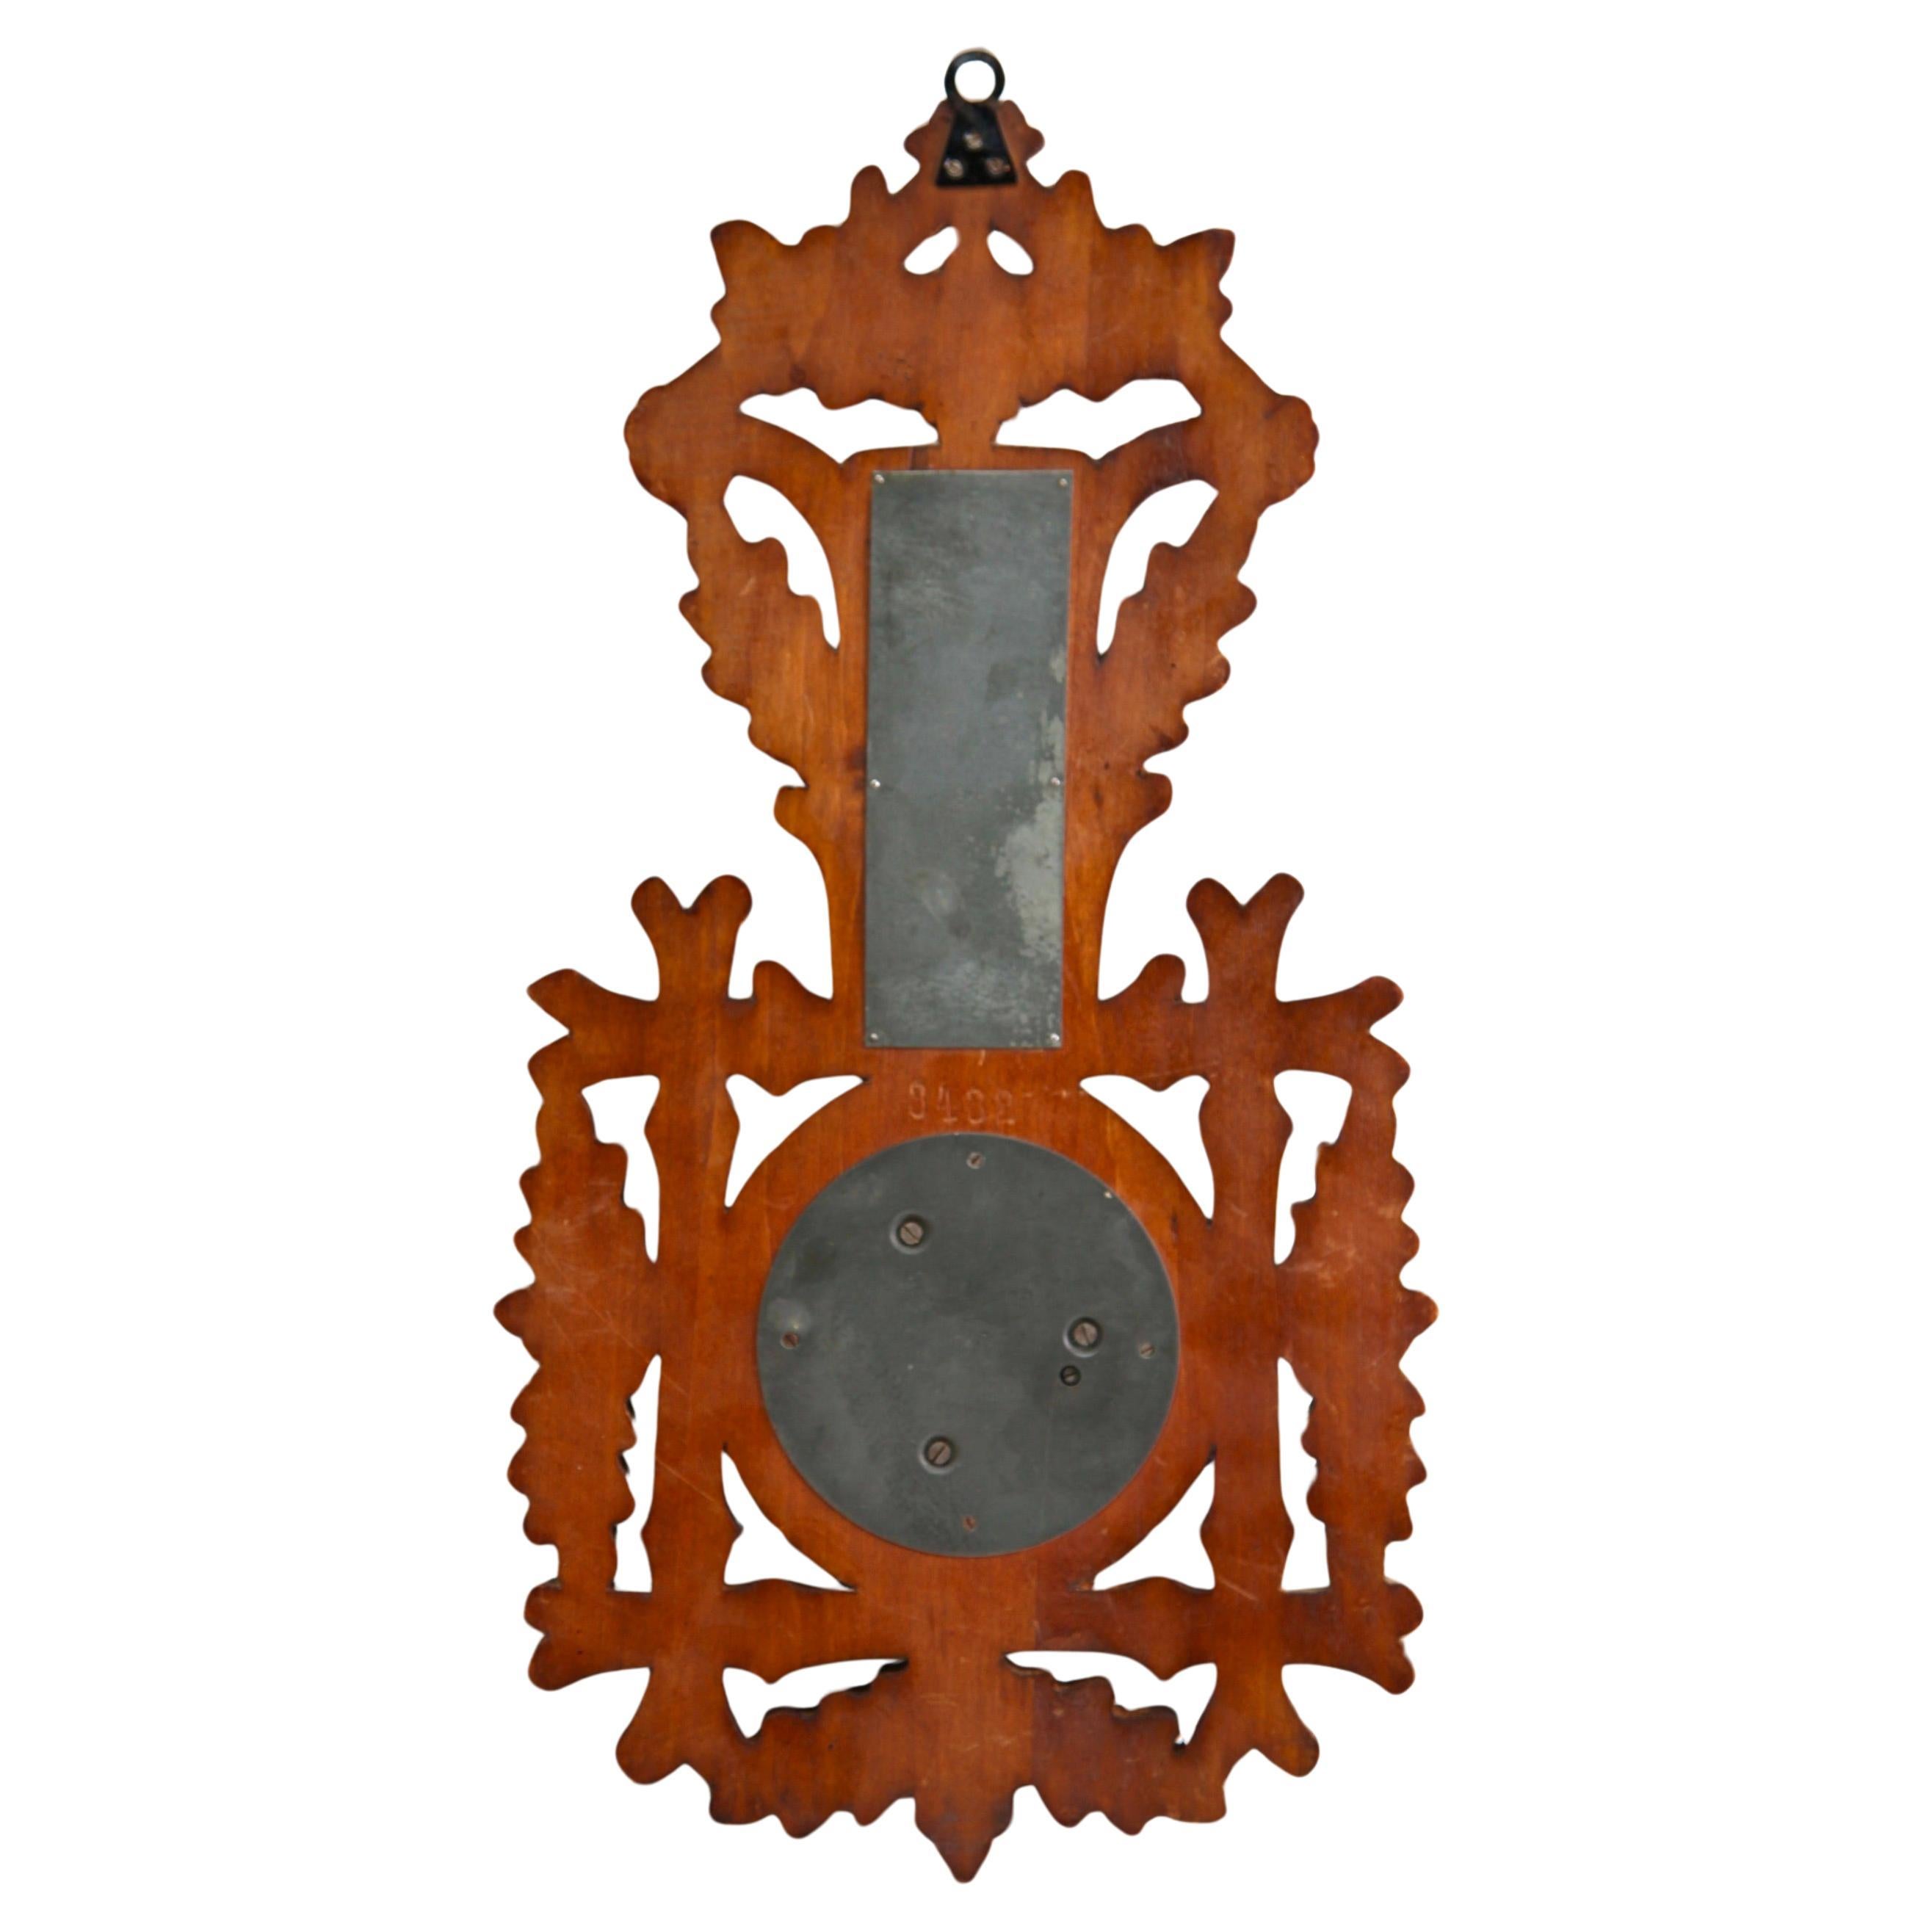 Wall-mounted weather station in carved walnut made in Belgium by A. de Lambert. High quality mechanism with jeweled movement barometer and thermometer (in centigrade)
Unusual design with high relief C-scrolls and flowers in Rococo style (from theArt